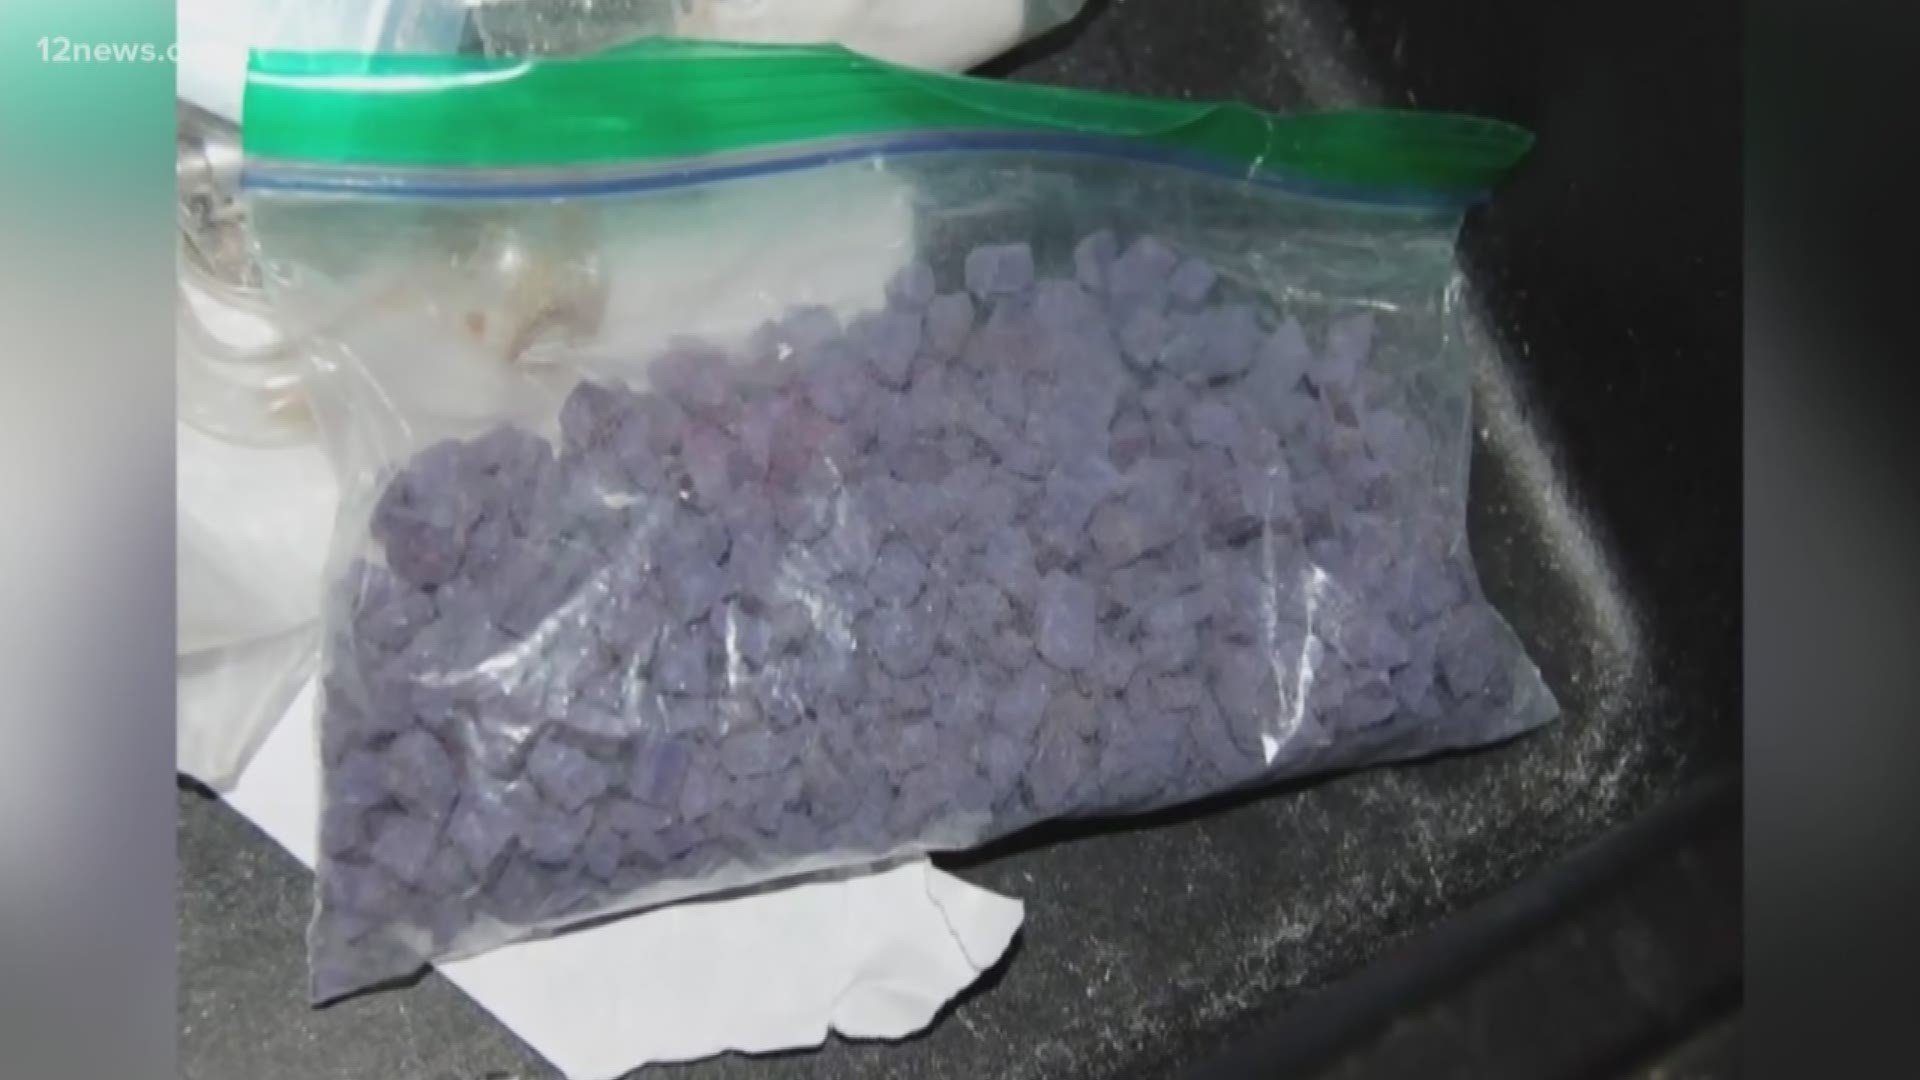 "Purple heroin", a mixture of heroin and fentanyl, has not reached the Valley just yet, but experts are warning that it's only a matter of time before the deadly street drug makes it way to the area.